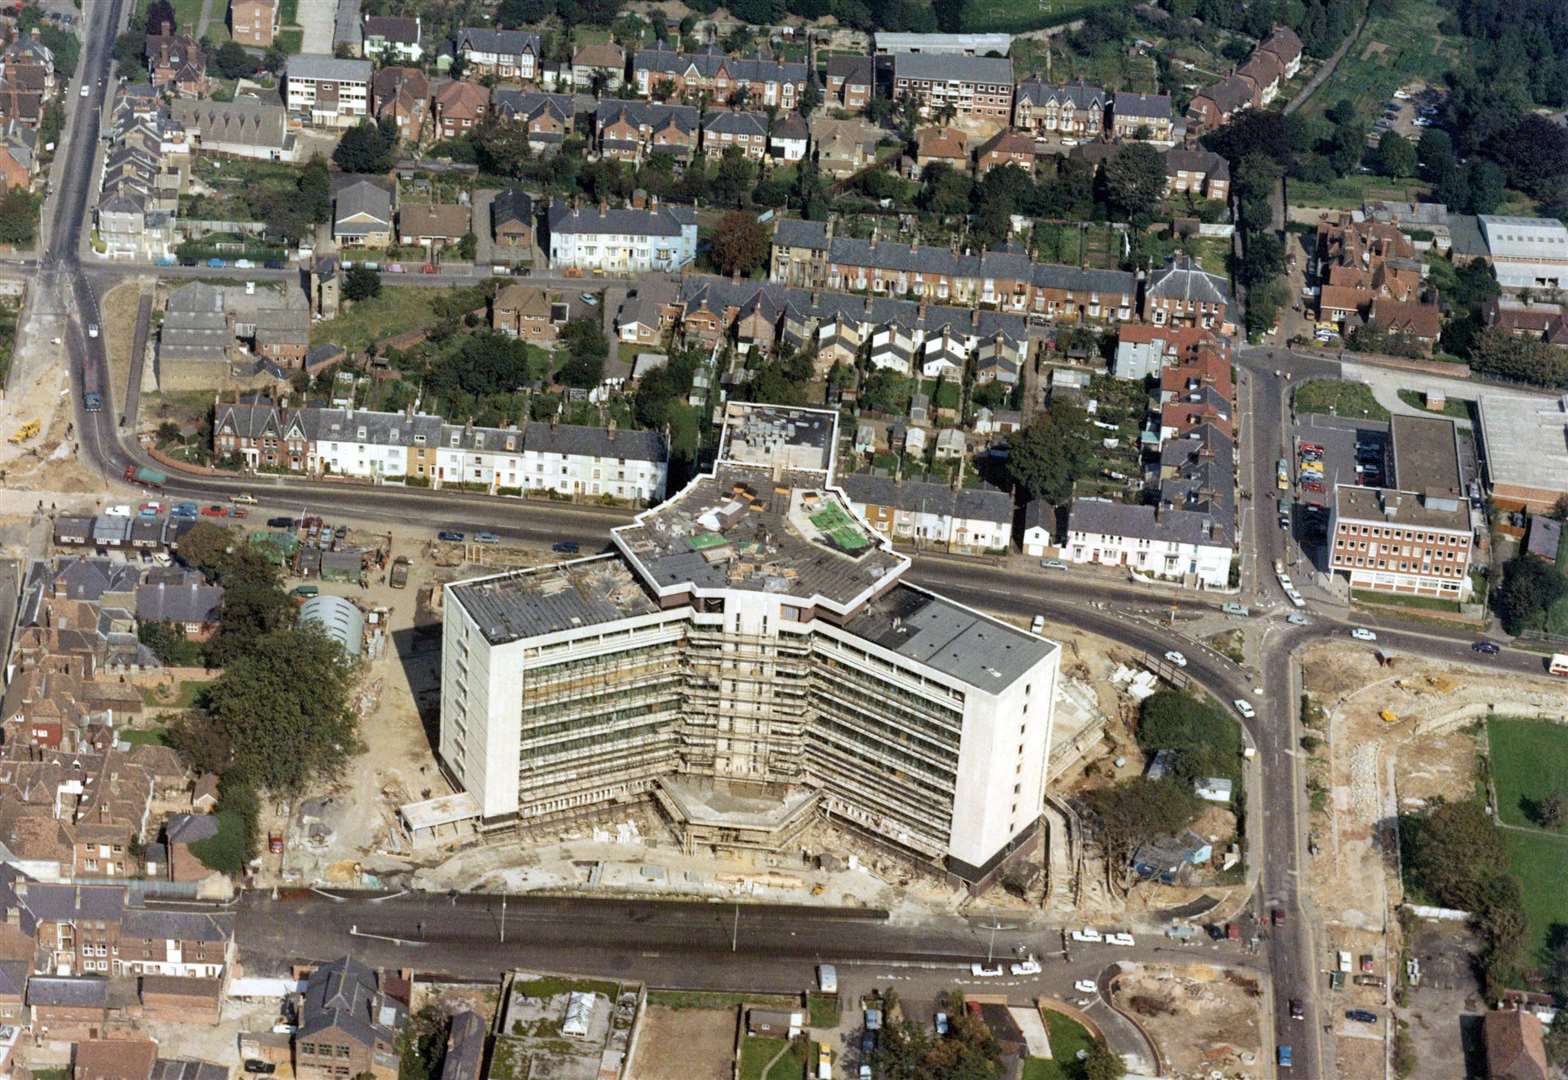 Kent from the skies in the 1970s and 80s